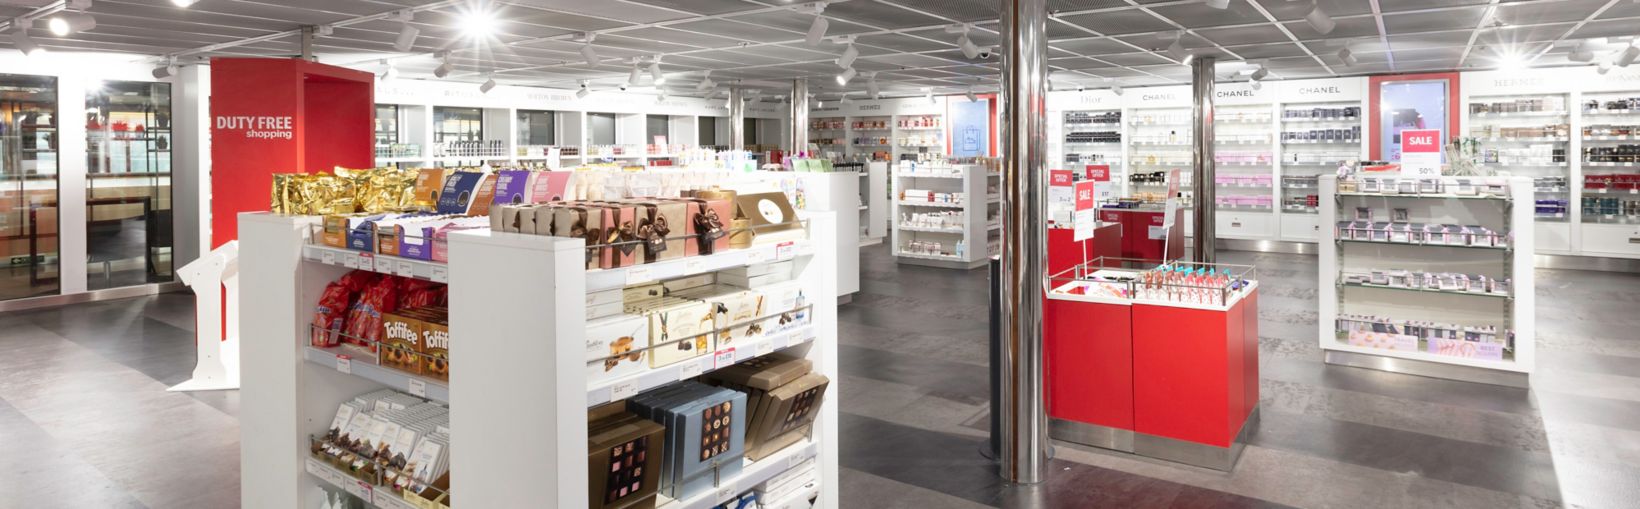 Onboard Duty-Free Shop showing a wide range of products for sale at discounted prices.